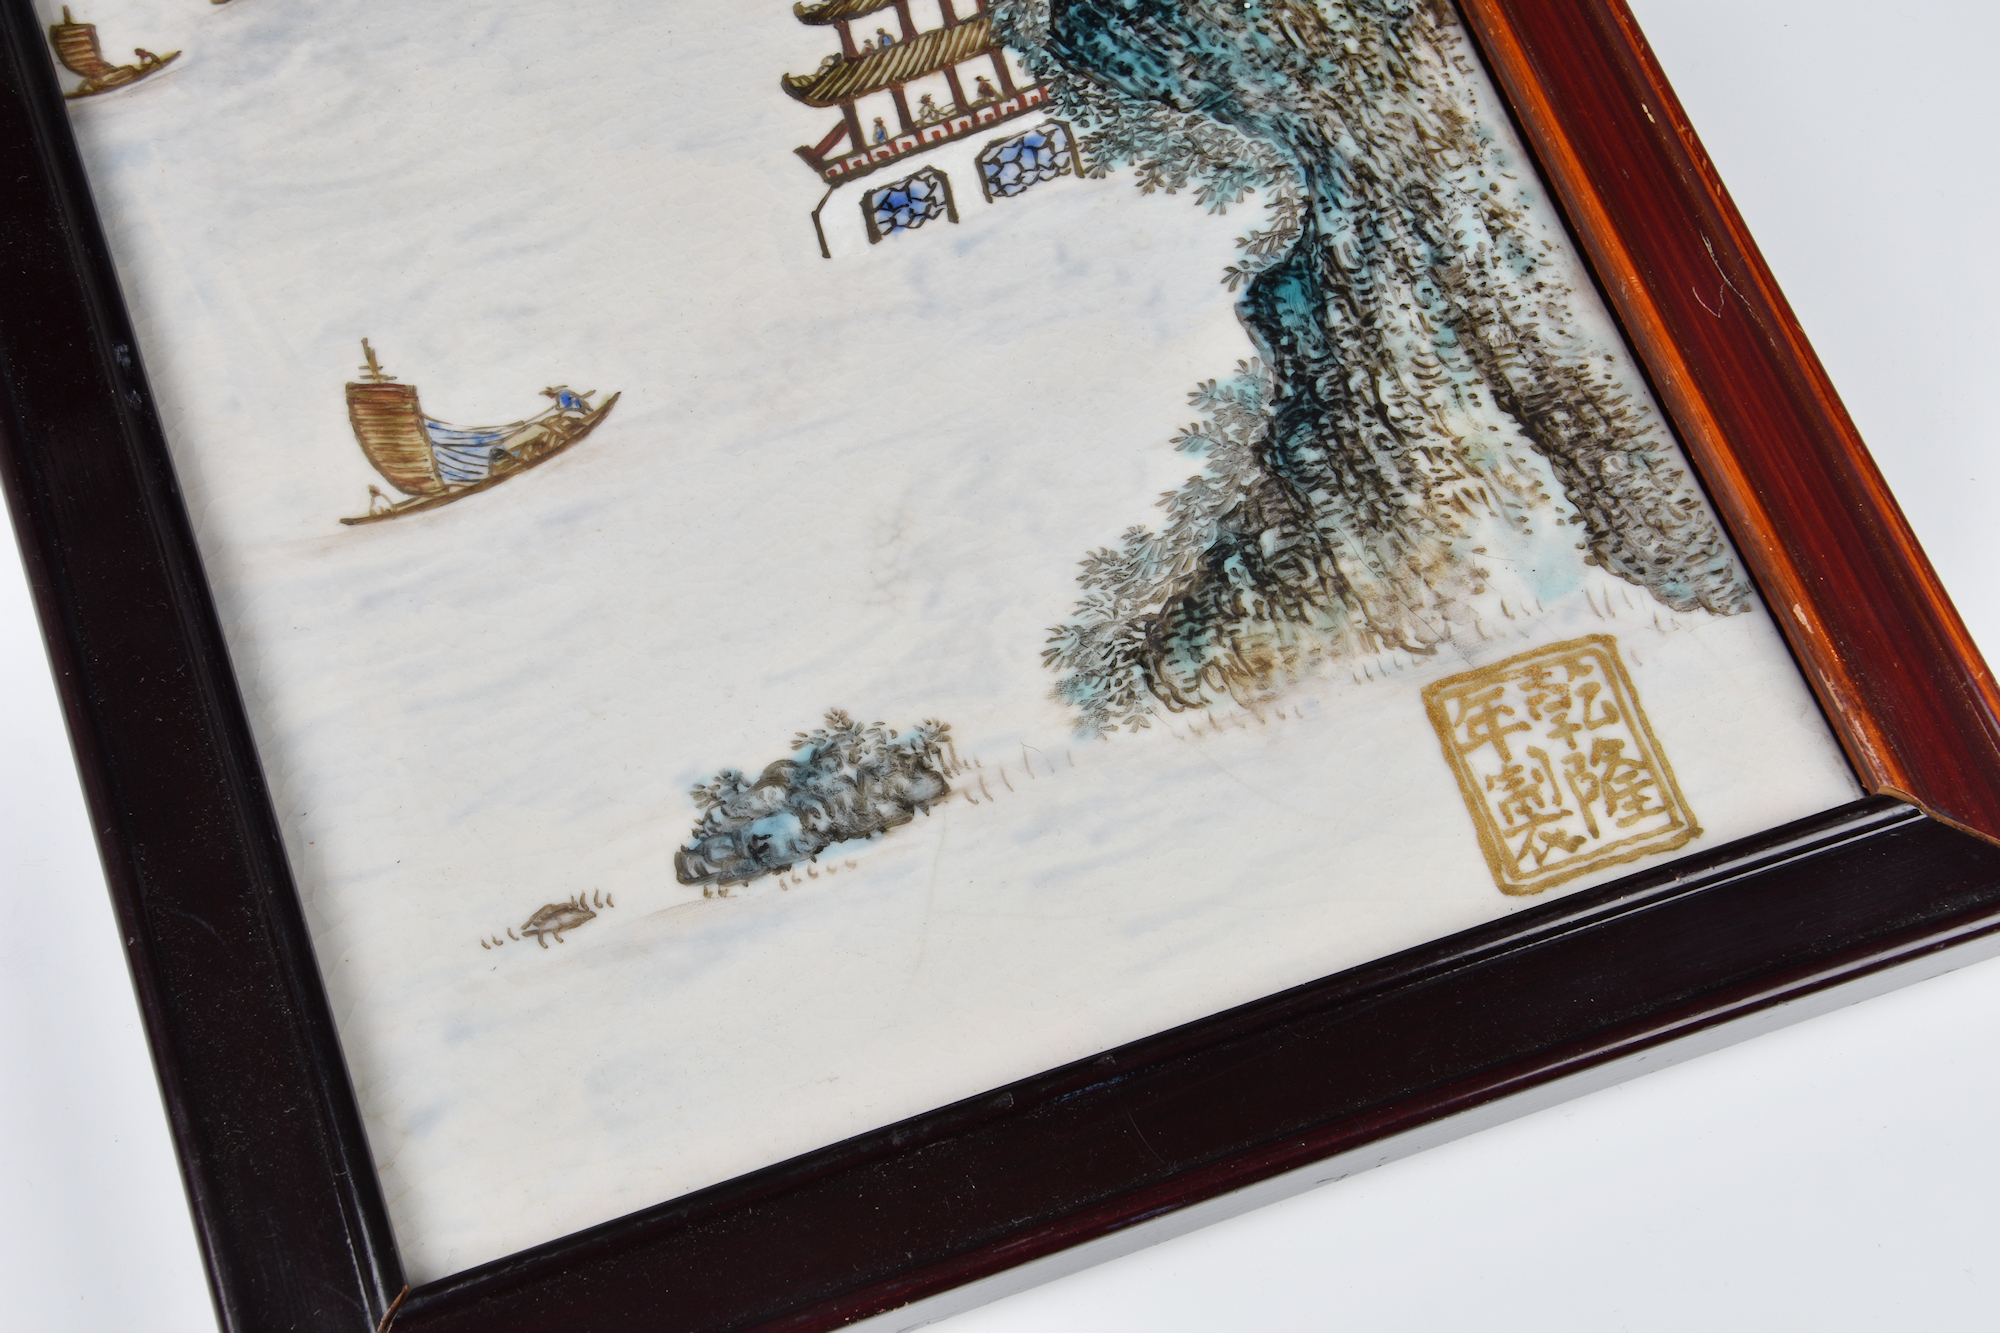 Two Chinese porcelain plaques, depicting boats in lake landscapes, late 20th century, in wooden - Image 7 of 11